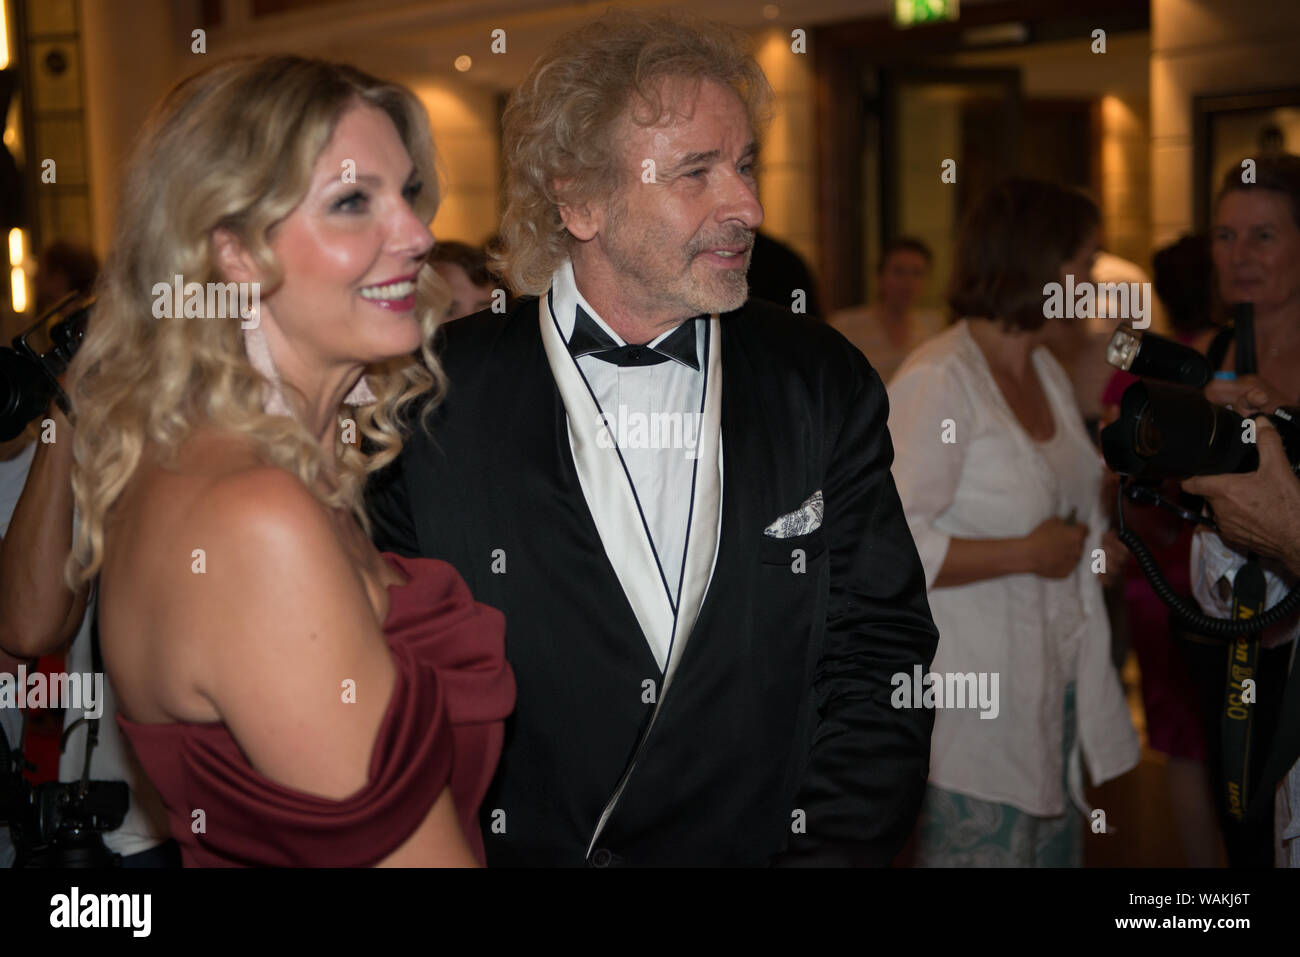 Entertainer Thomas Gottschalk with his new girlfriend Karina Groß attending the opening ceremony of Filmfest München 2019 Stock Photo